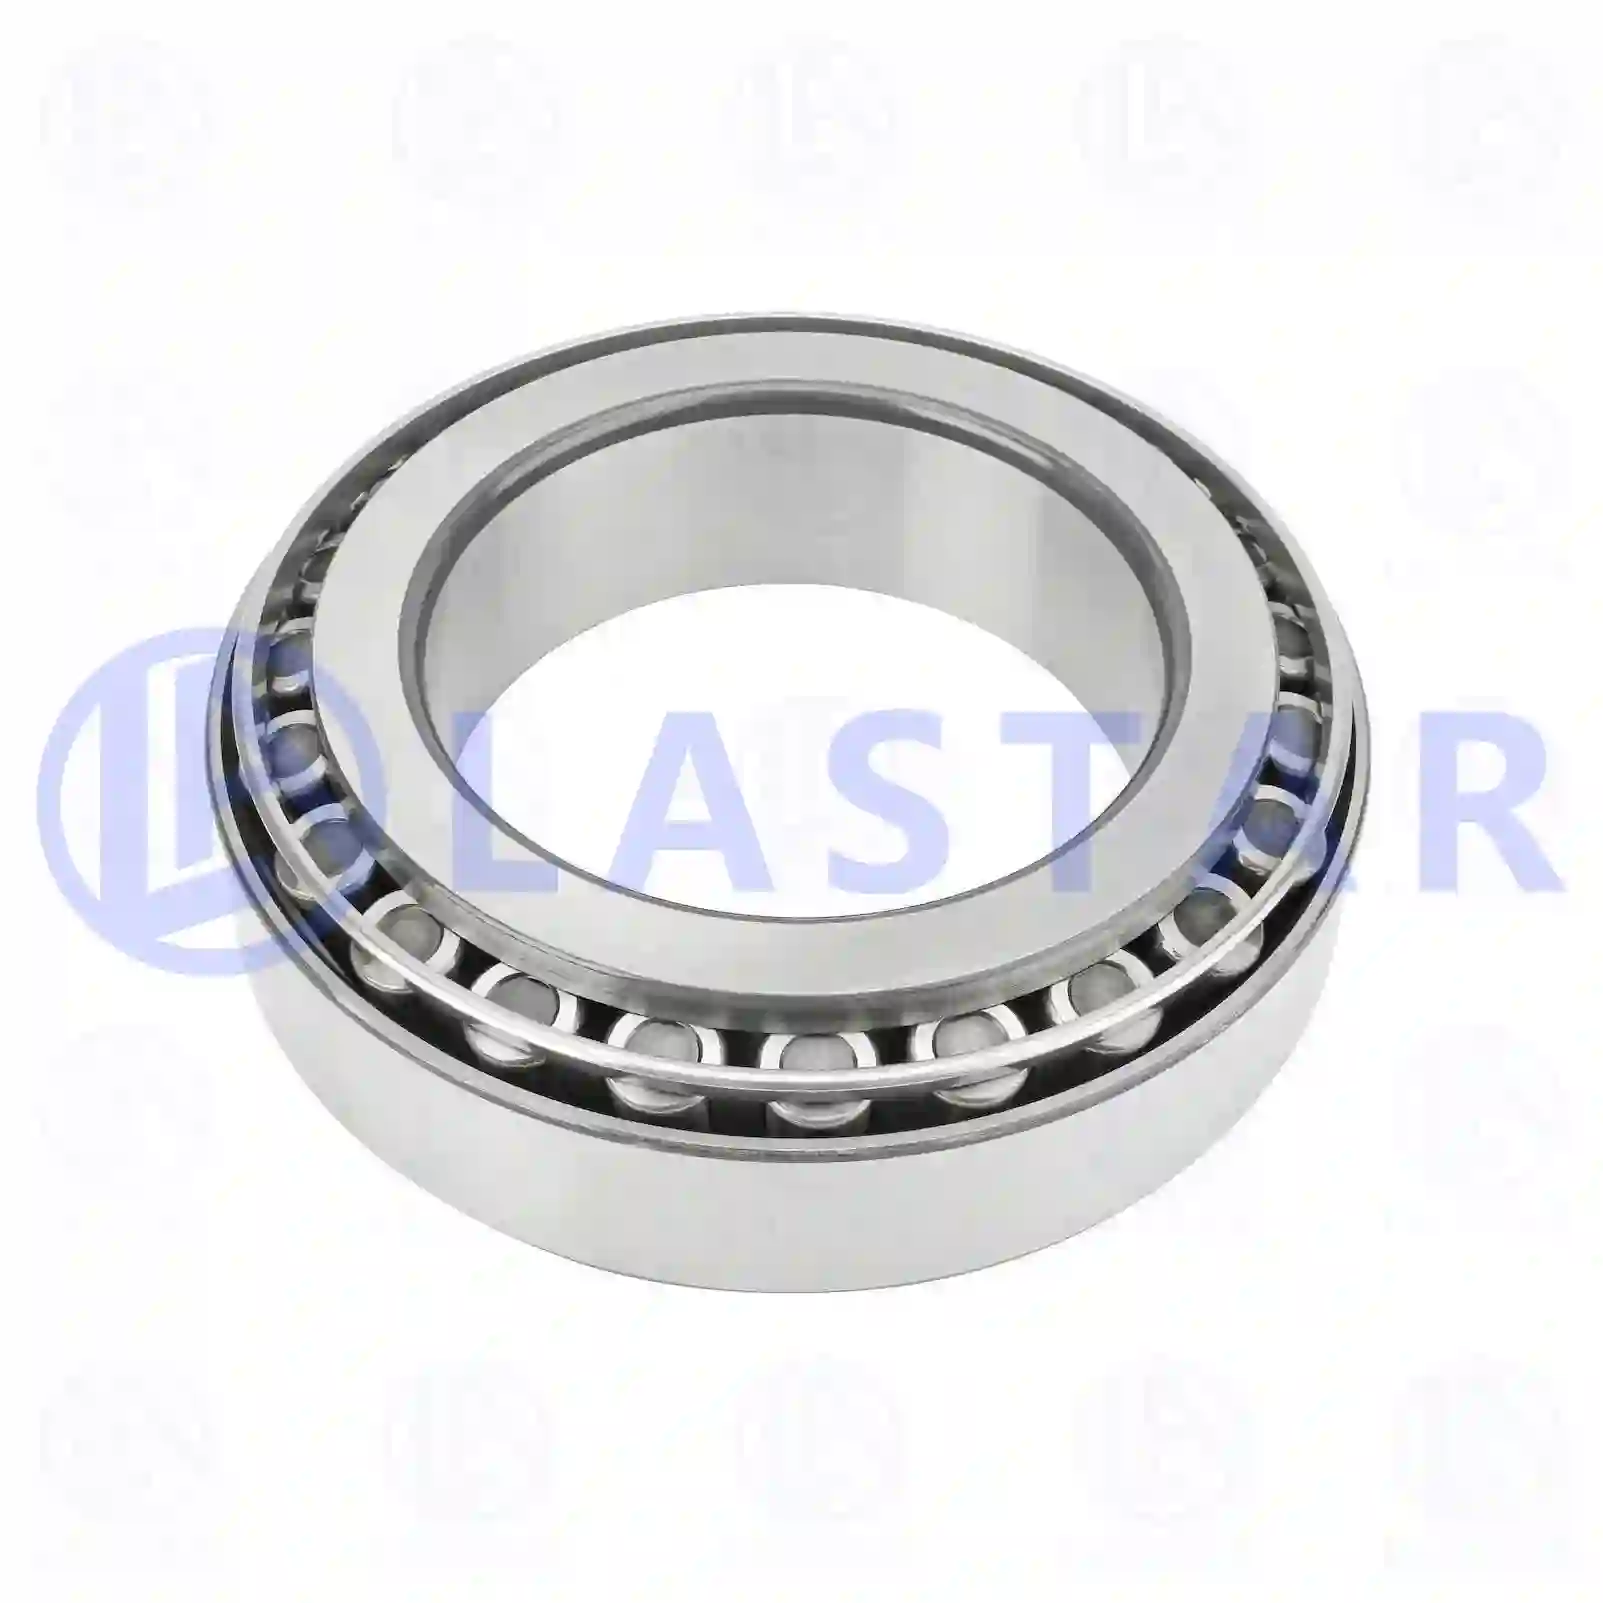 Bearings Tapered roller bearing, la no: 77724629 ,  oem no:9442156, 08194959, 0023336046, 0023336123, 0959901205, 3661013900, 324791025000, JHM72024999401, 2V2501319B Lastar Spare Part | Truck Spare Parts, Auotomotive Spare Parts